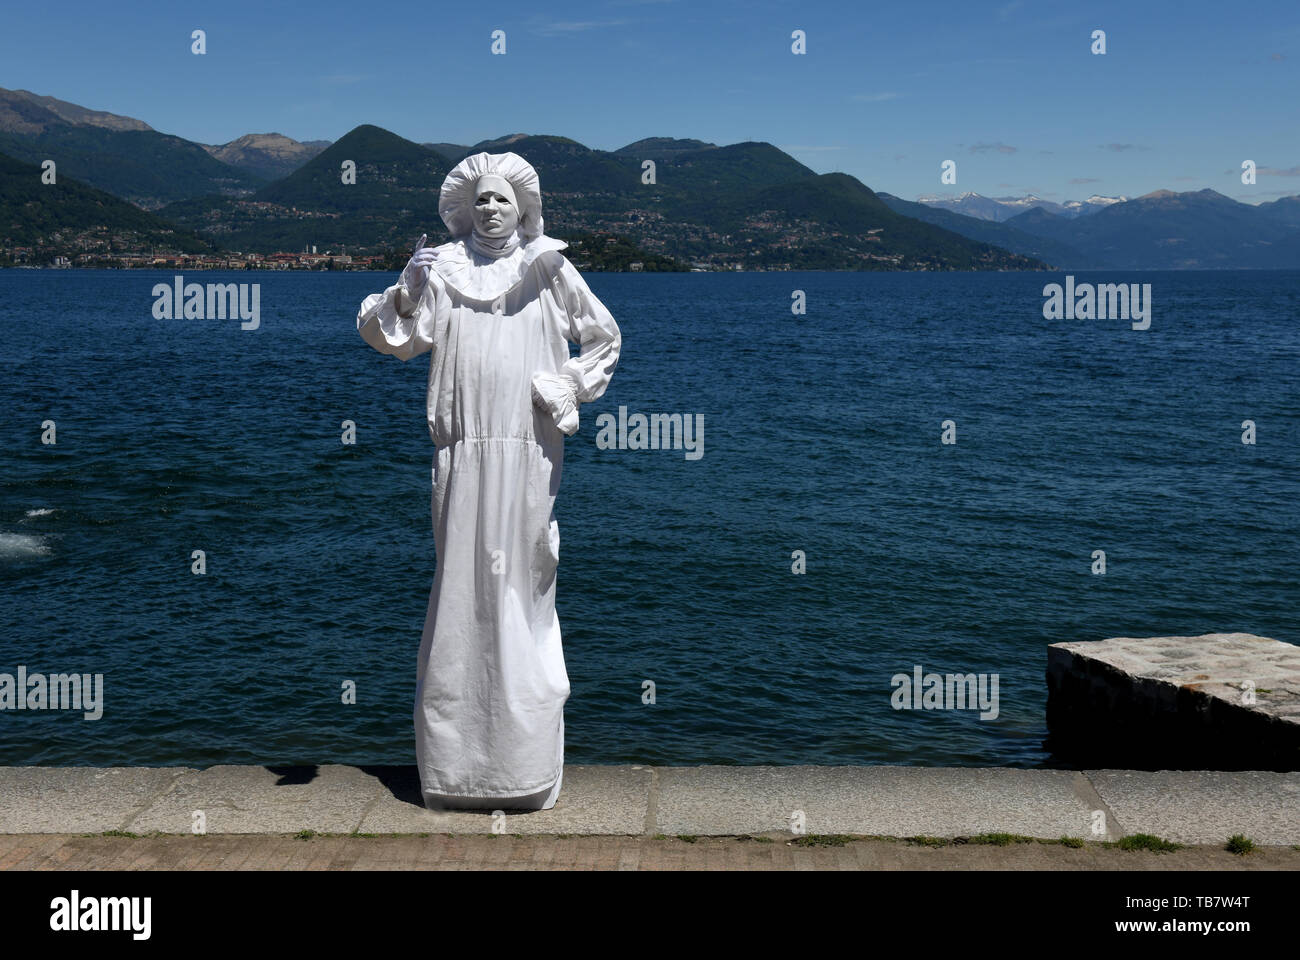 Mime artist dressed in all white, Lake Maggiore Italy Stock Photo